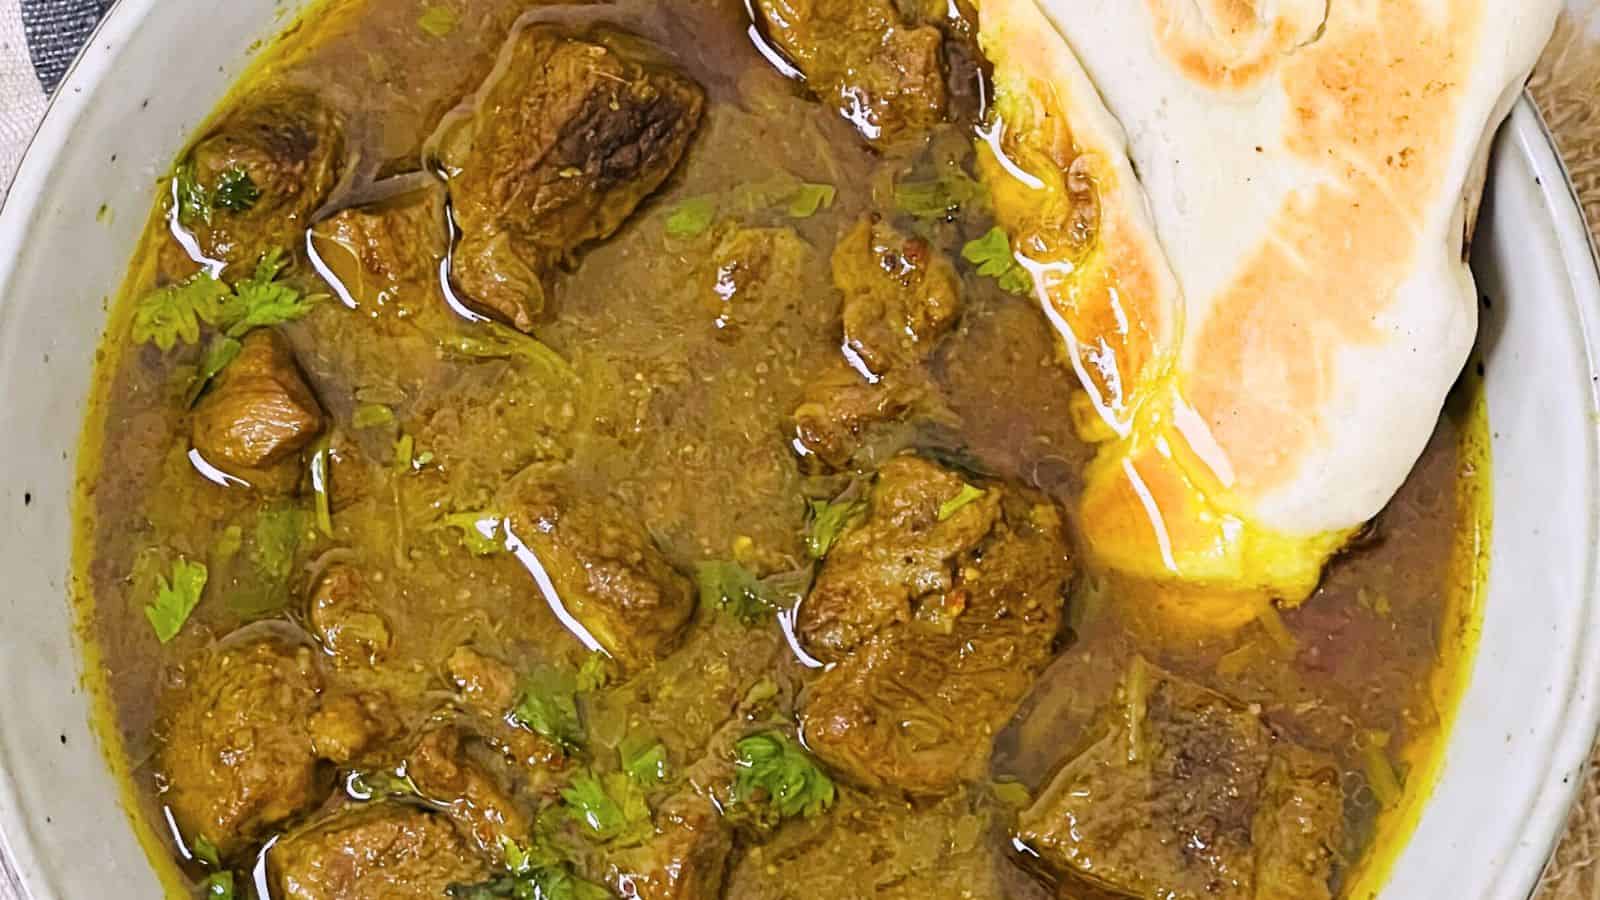 <p>If you are ready for some heat, Lamb Vindaloo has got it. This curry from Goa is famous, yes, but still underrated for the explosion of flavors it offers. It's one of the activating Indian dishes that will literally get you fired up.<br><strong>Get the Recipe: </strong><a href="https://easyindiancookbook.com/lamb-vindaloo/?utm_source=msn&utm_medium=page&utm_campaign=msn">Lamb Vindaloo</a></p>